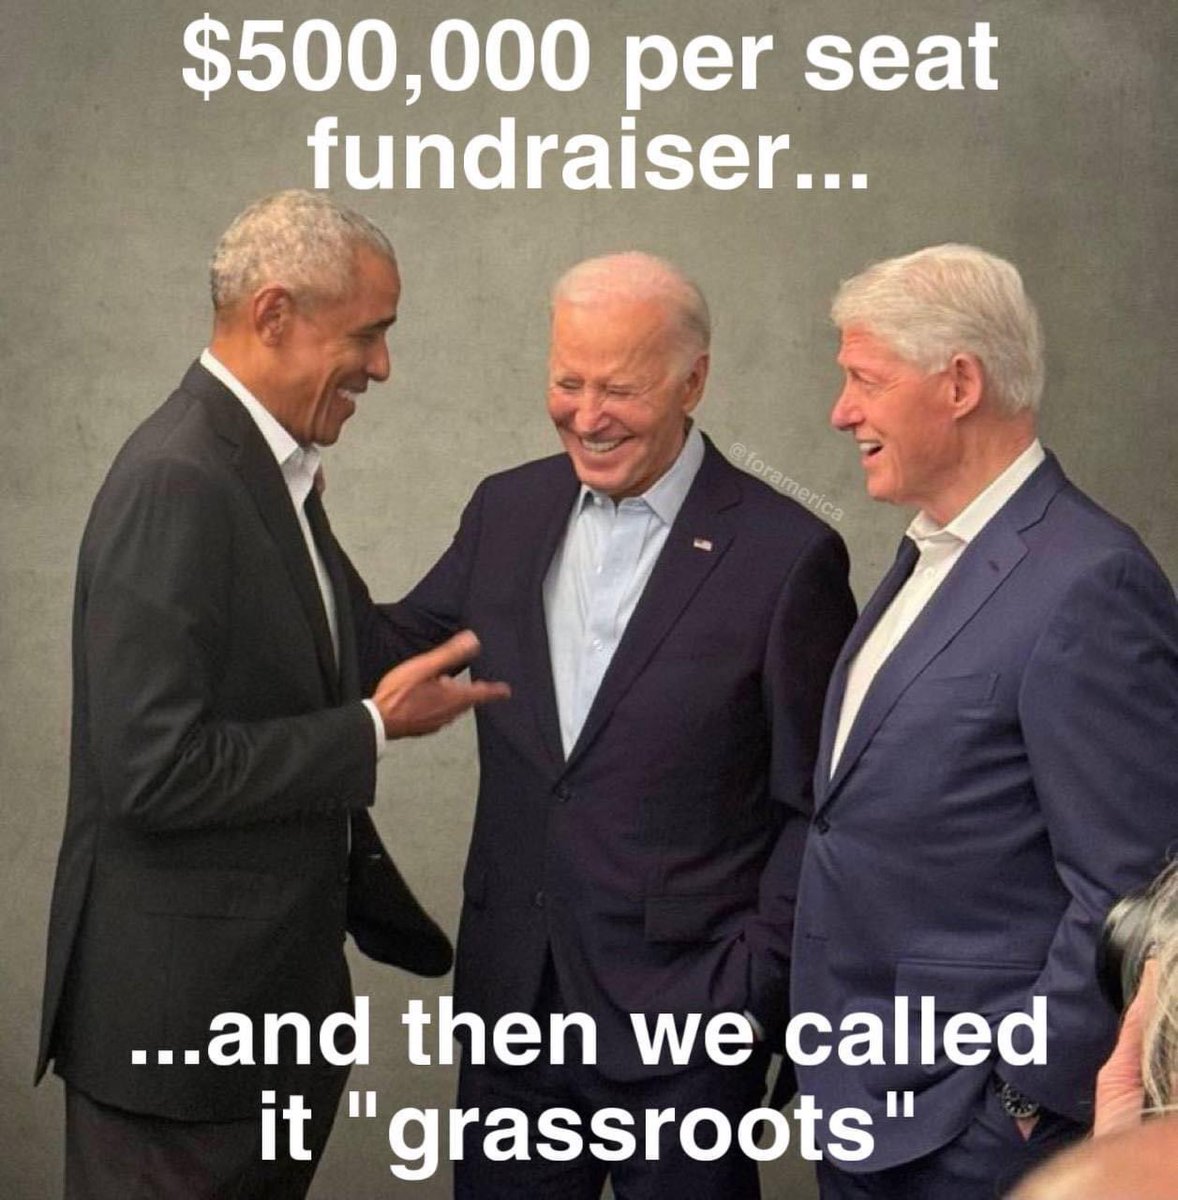 Fundraising? That’s what they call now? Who ever pays that much for a seat are paying for bribes.. Joe, Obama and Bill are rotten corrupt and power hungry men! @emma6USA ⚔️🌺⚔️ @x4Eileen @StevenLegacy411 @HPY2KW @LegendaryXrs @PecanC8 @stevealex140 @Czesc45 @thandar324…